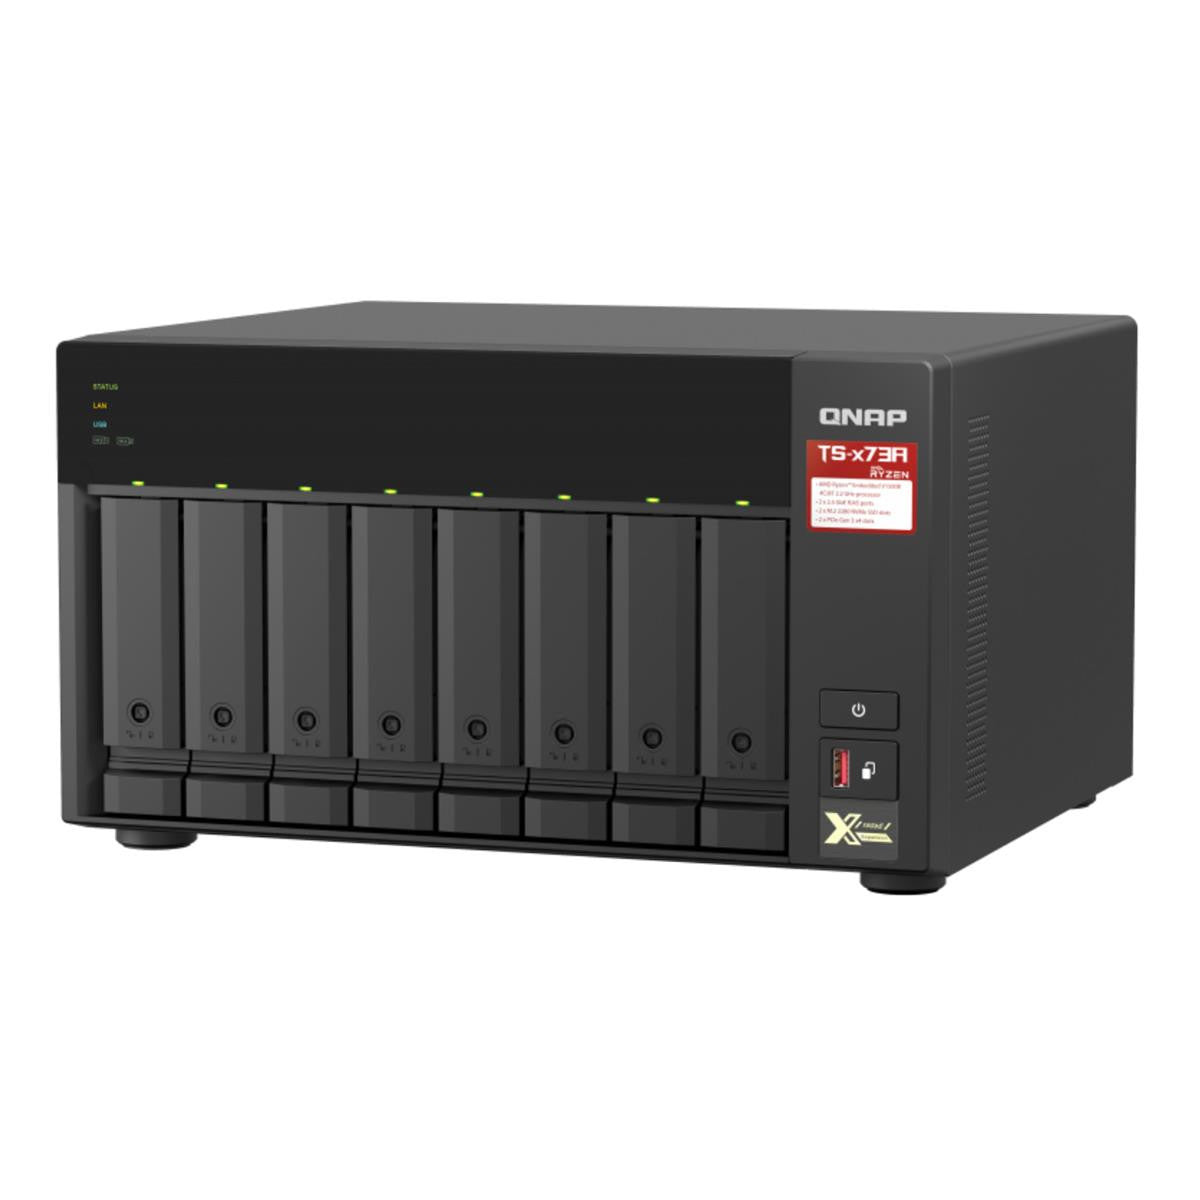 QNAP TS-873A 8-BAY NAS with 16GB DDR4 RAM and 96TB (8x12TB) Western Digital RED PLUS Drives Fully Assembled and Tested